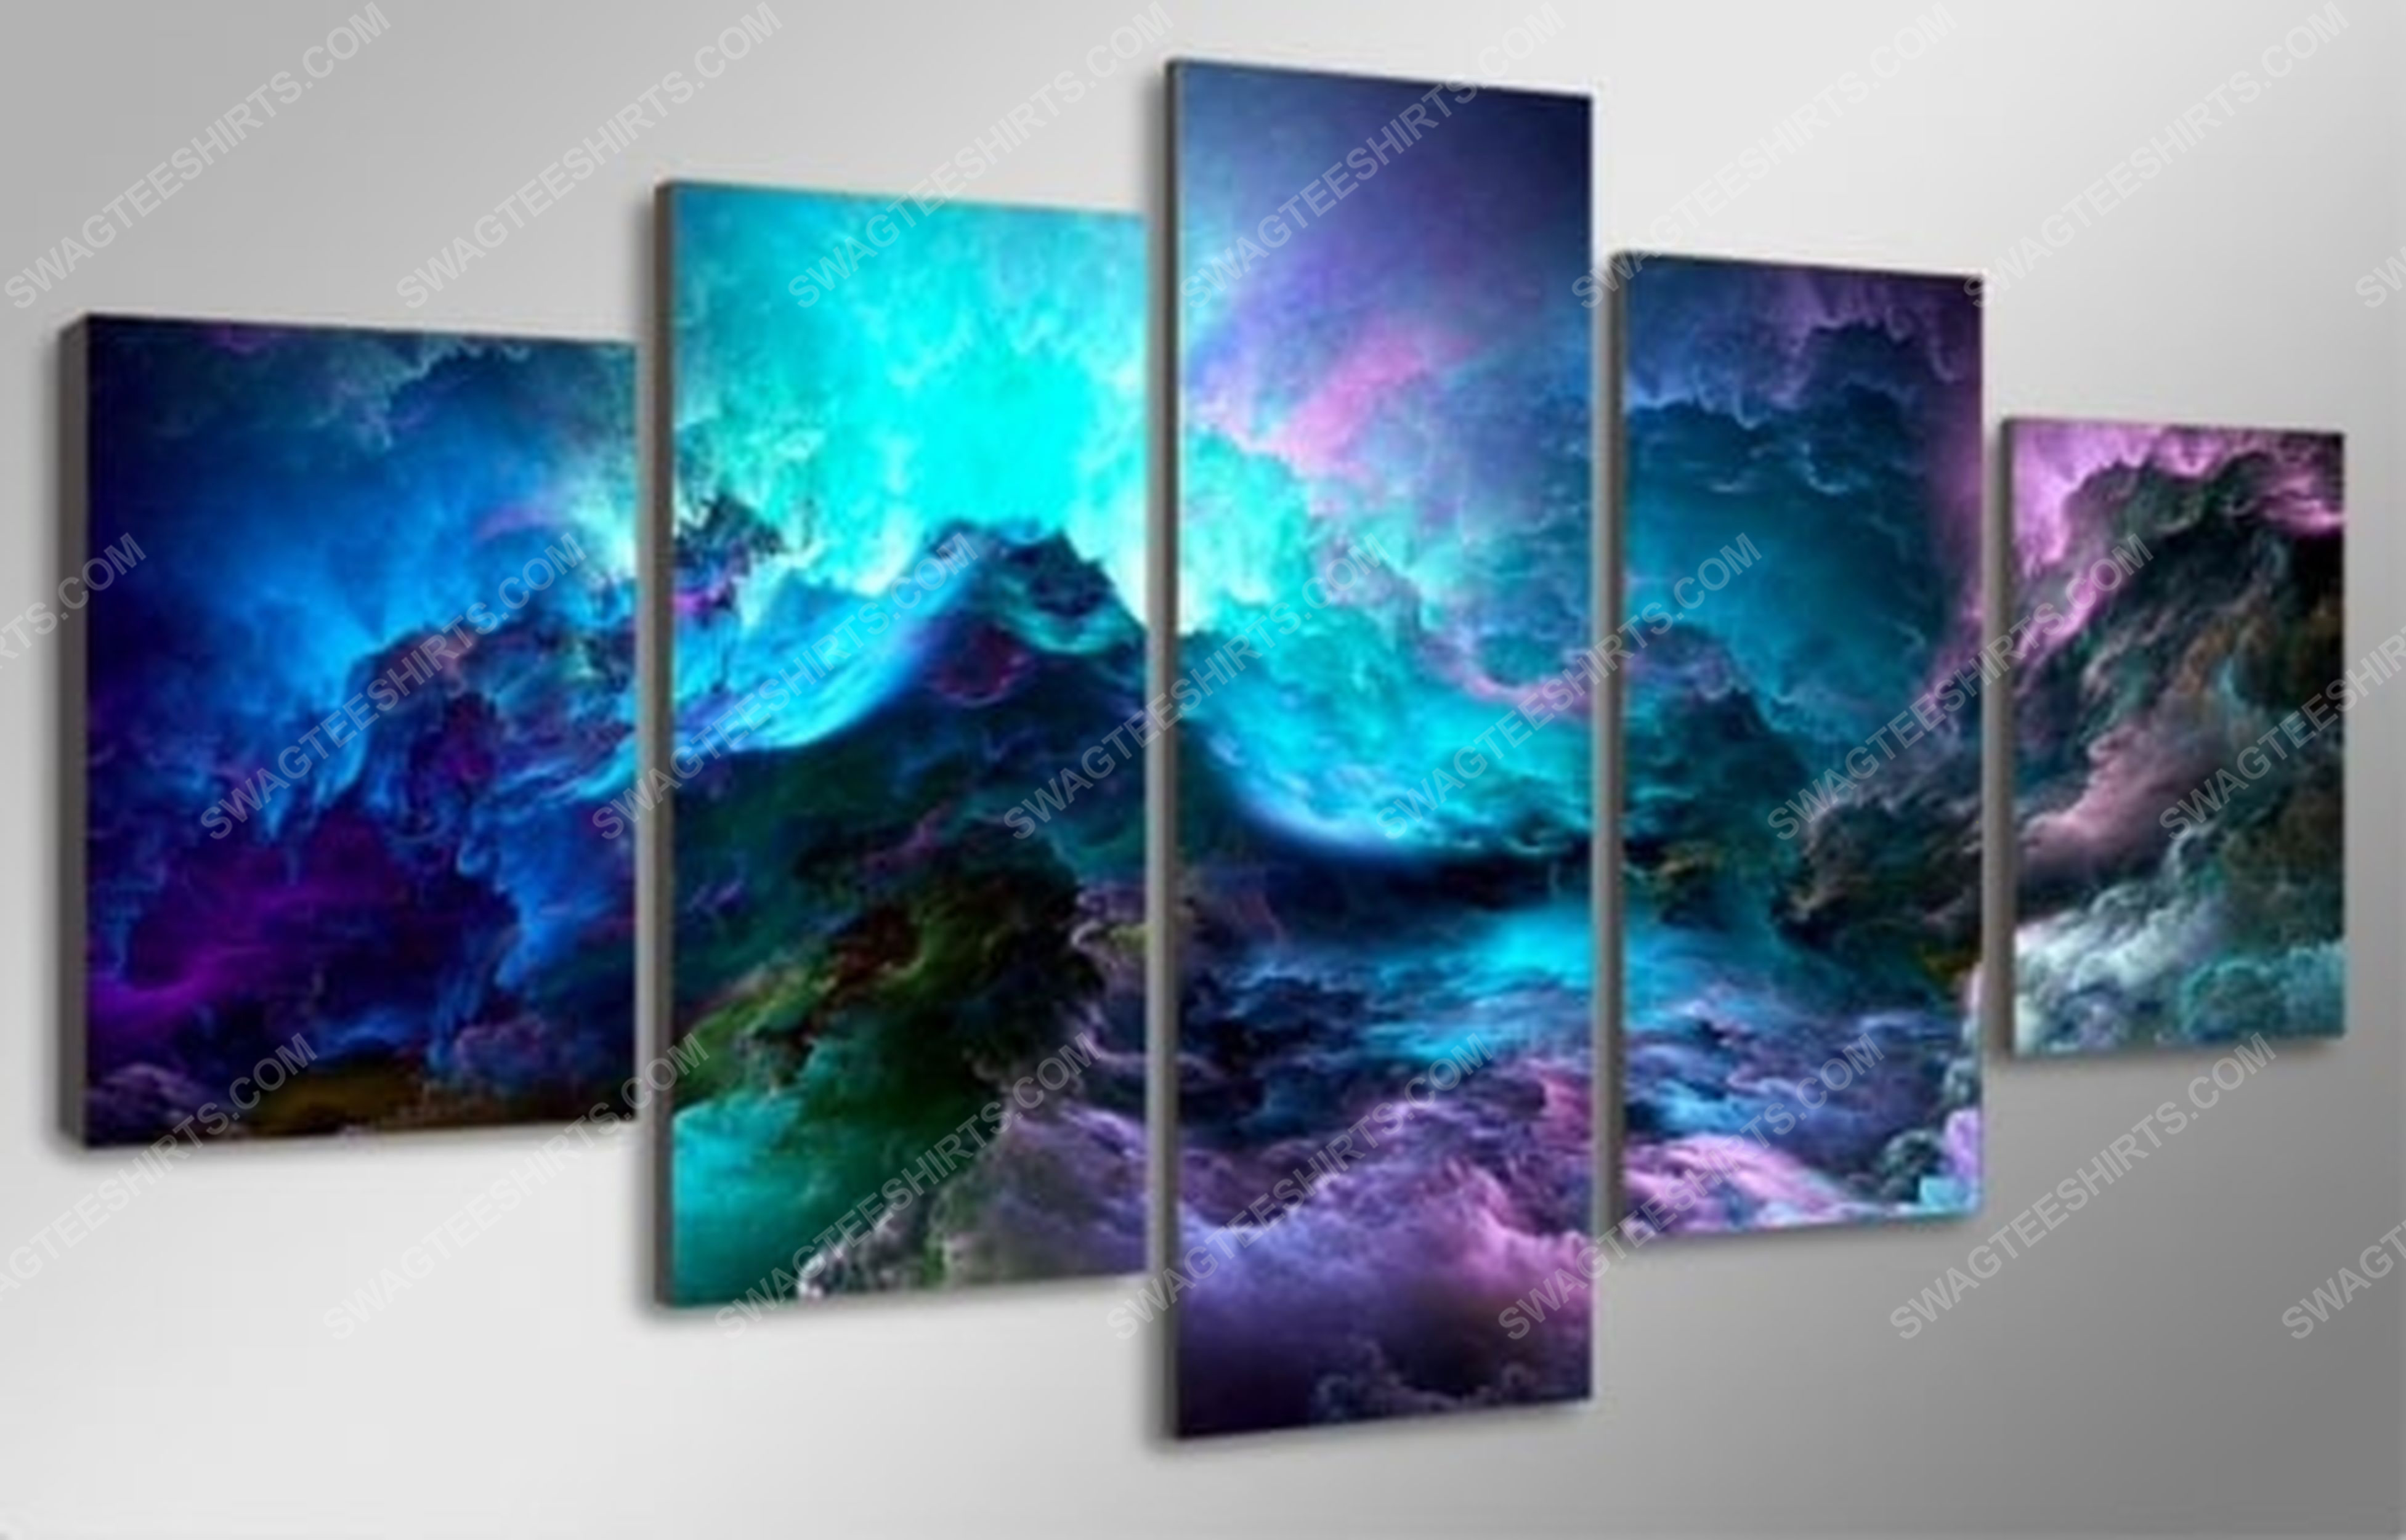 Purple blue glowing clouds print painting canvas wall art home decor